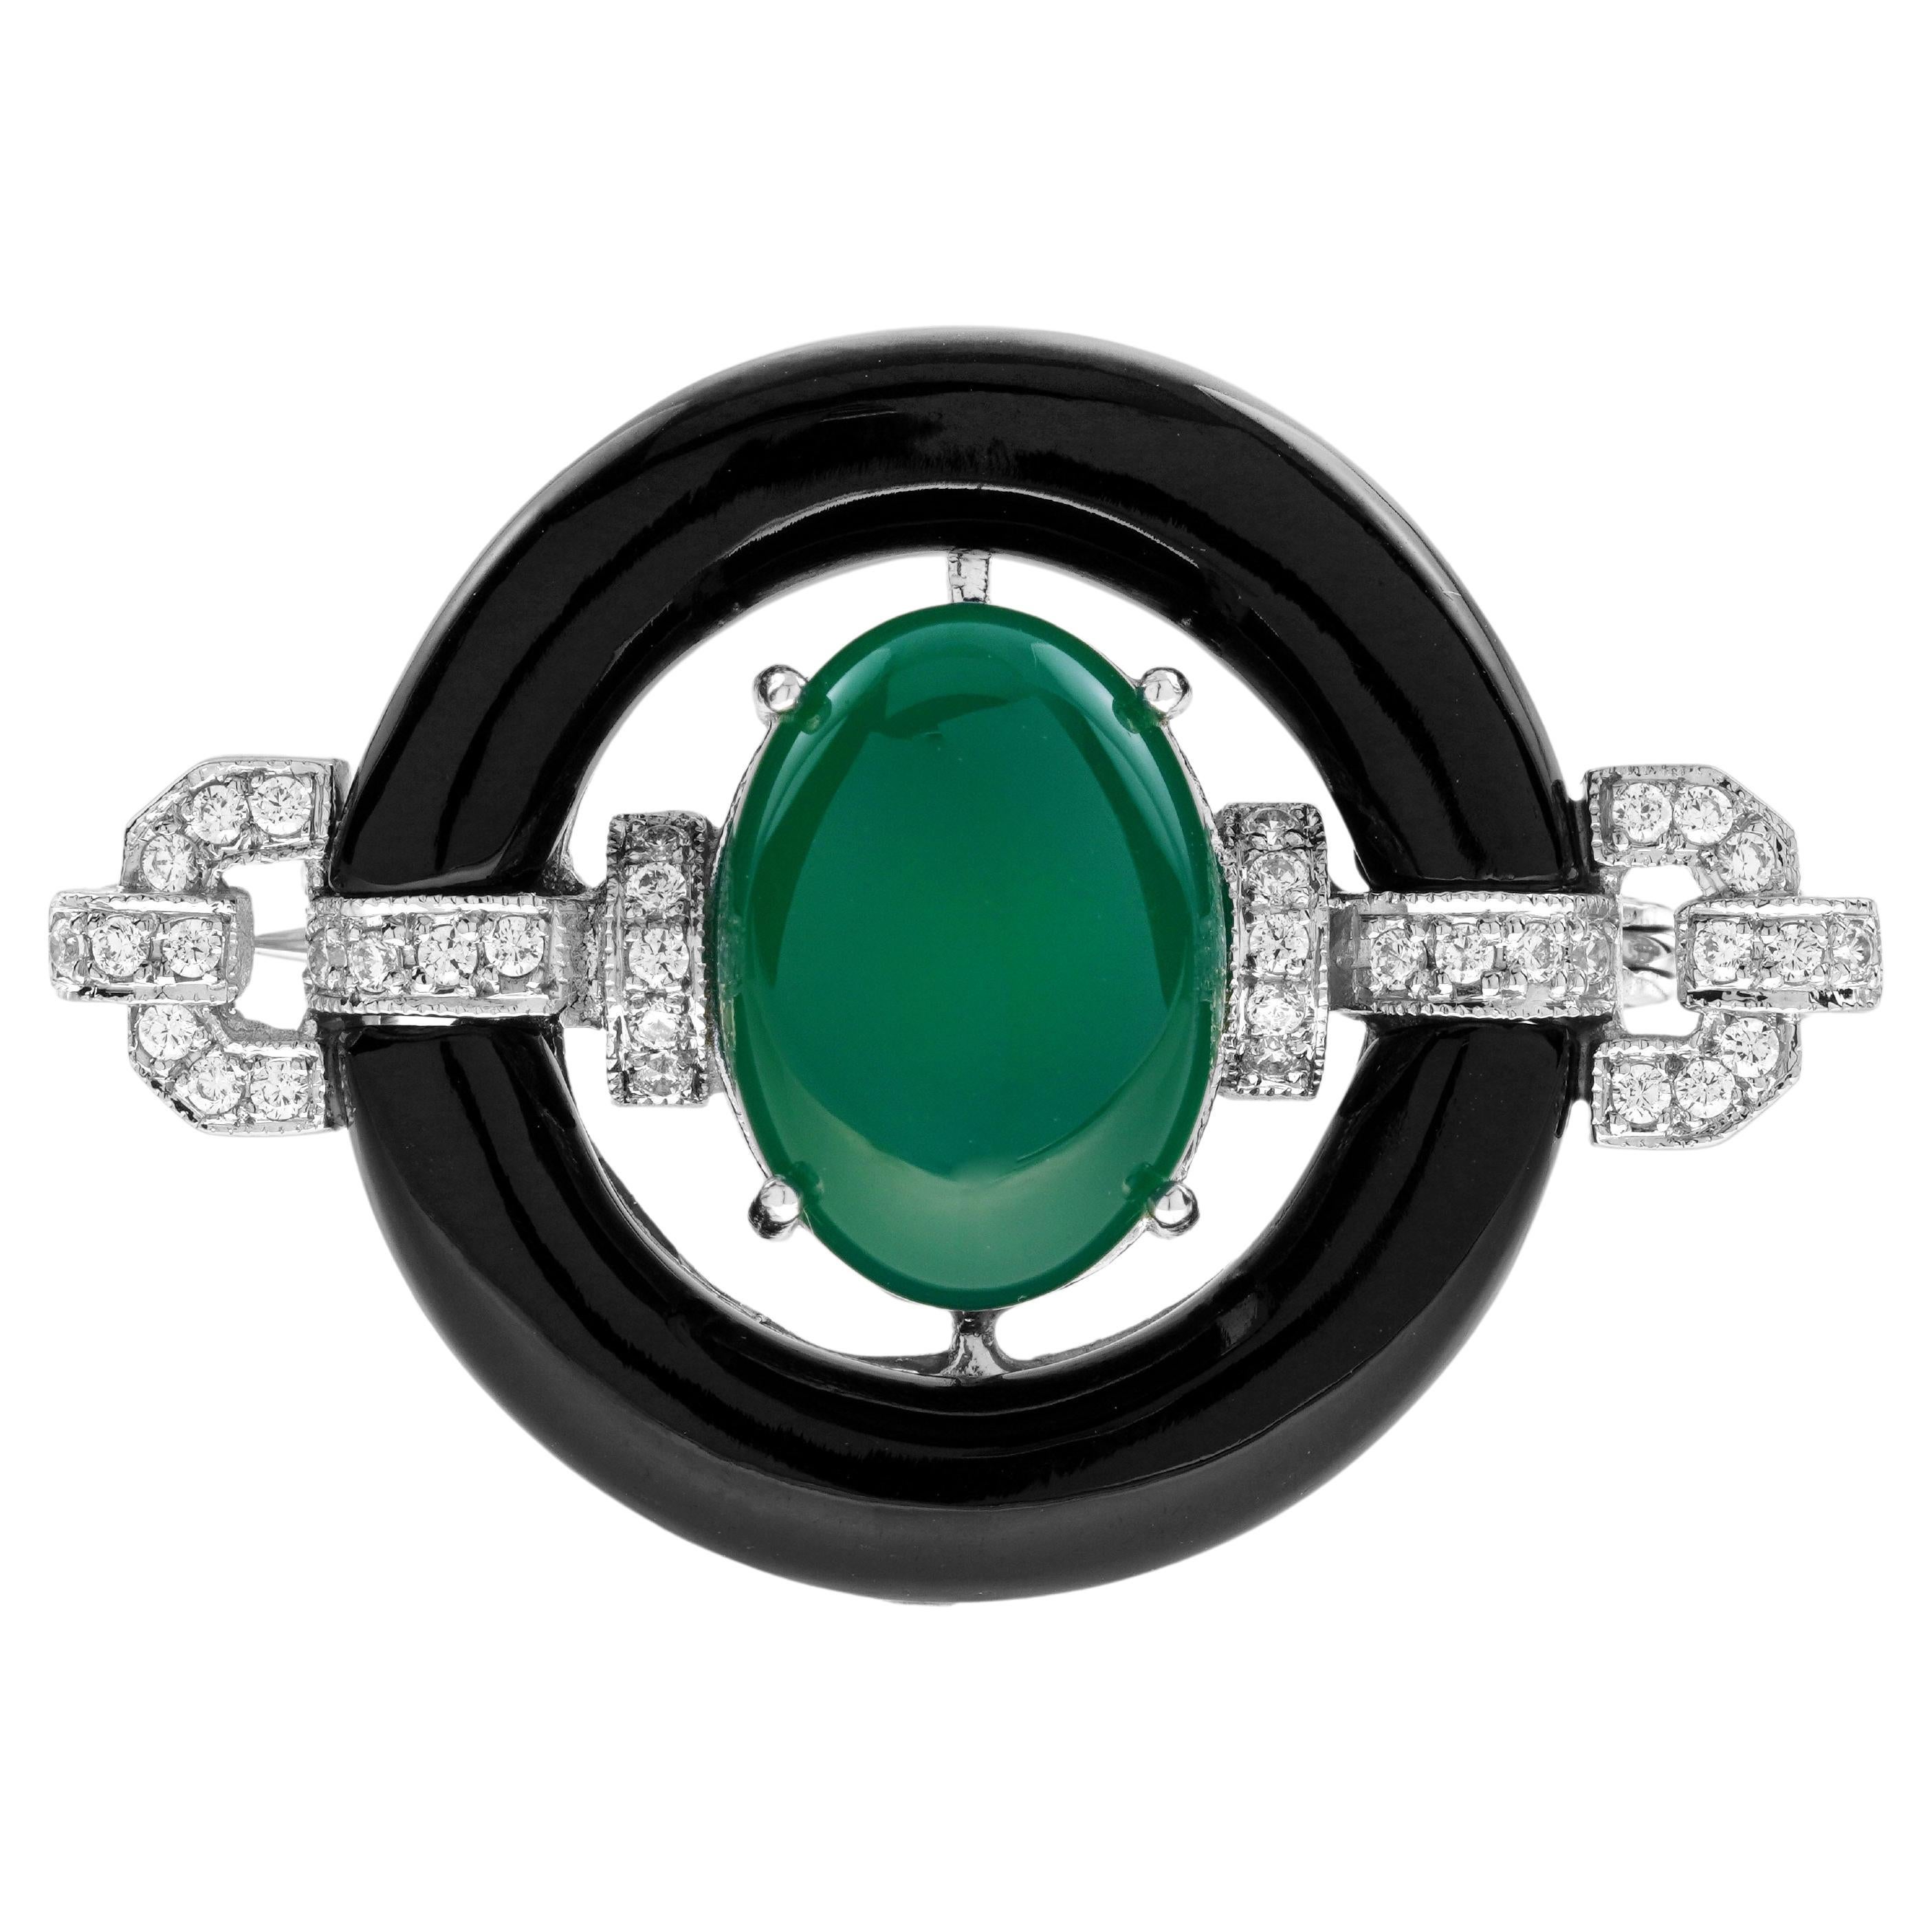 Green Agate Onyx Diamond Art Deco Style Brooch in 14K White Gold For Sale